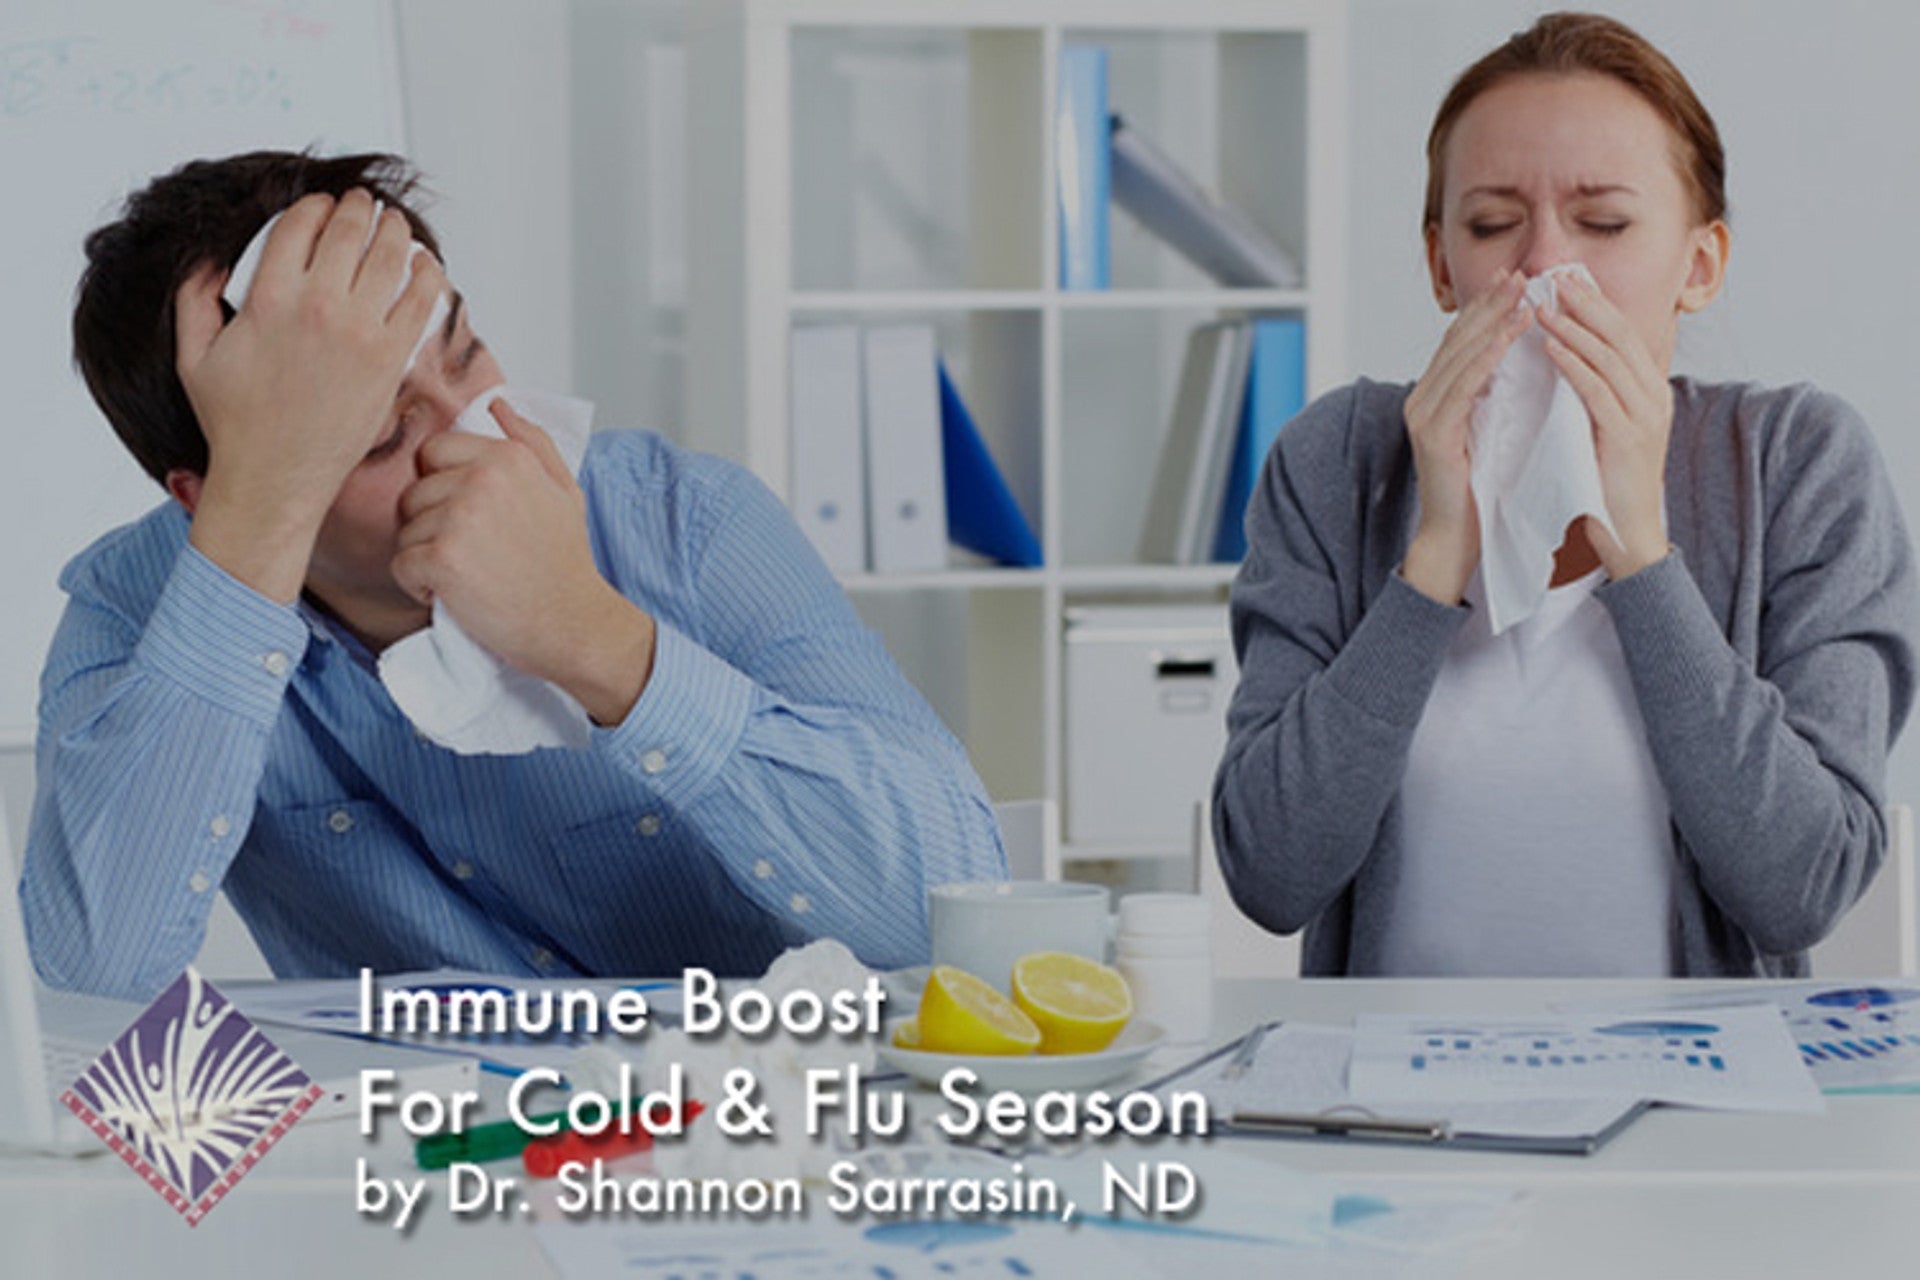 5 Surprising Ways to Supercharge Your Immune System and Beat Cold and Flu Season